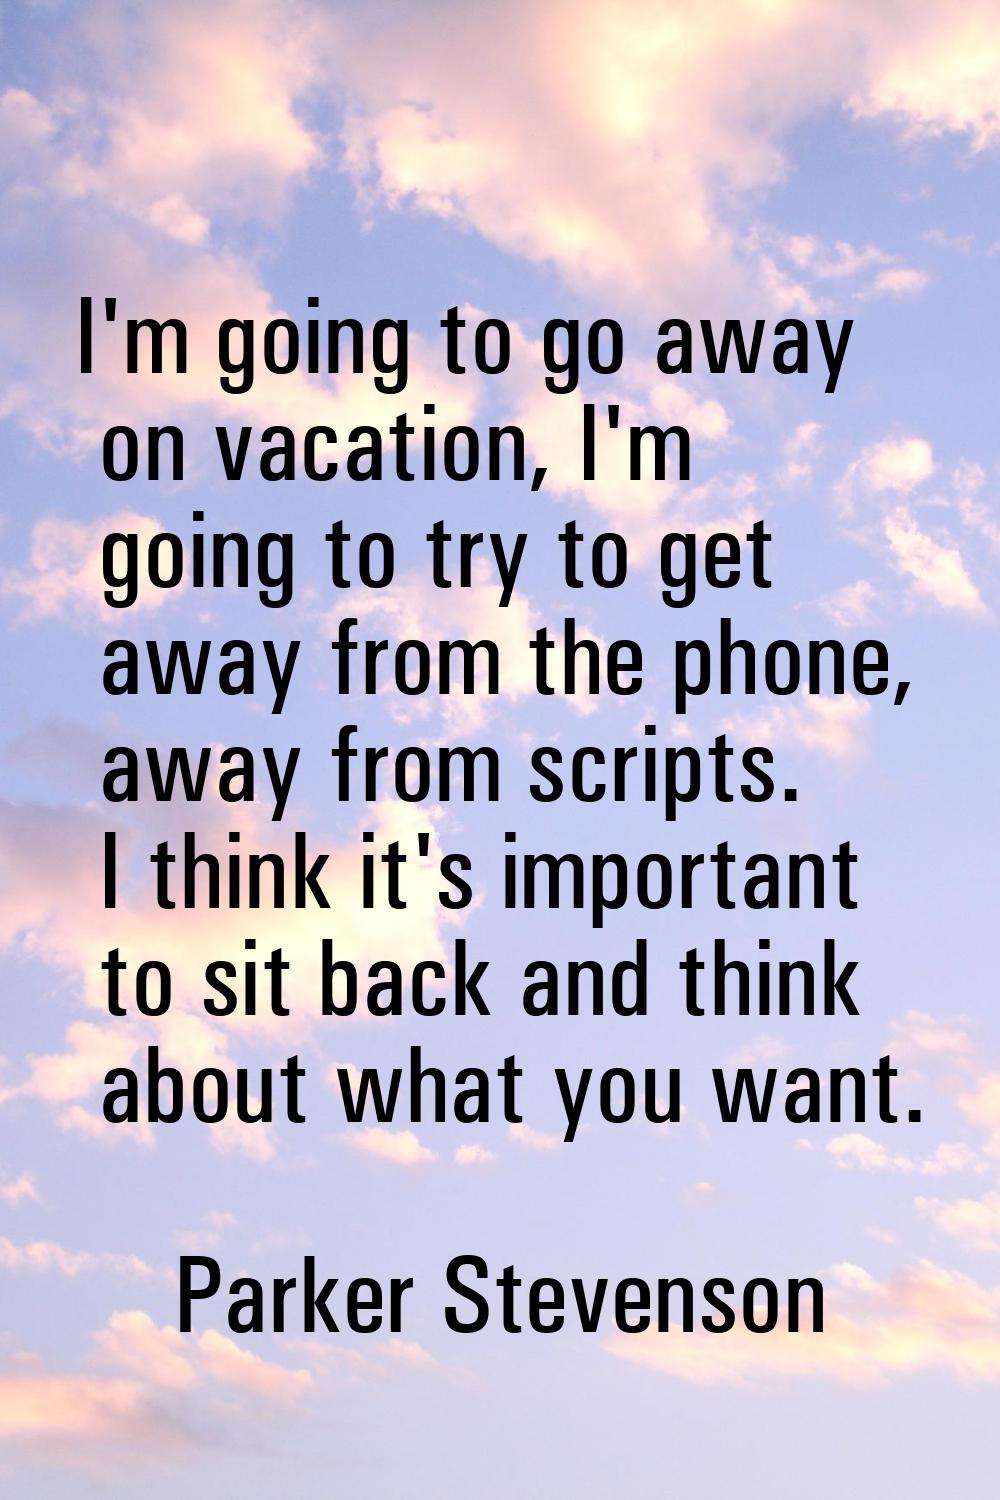 I'm going to go away on vacation, I'm going to try to get away from the phone, away from scripts. I